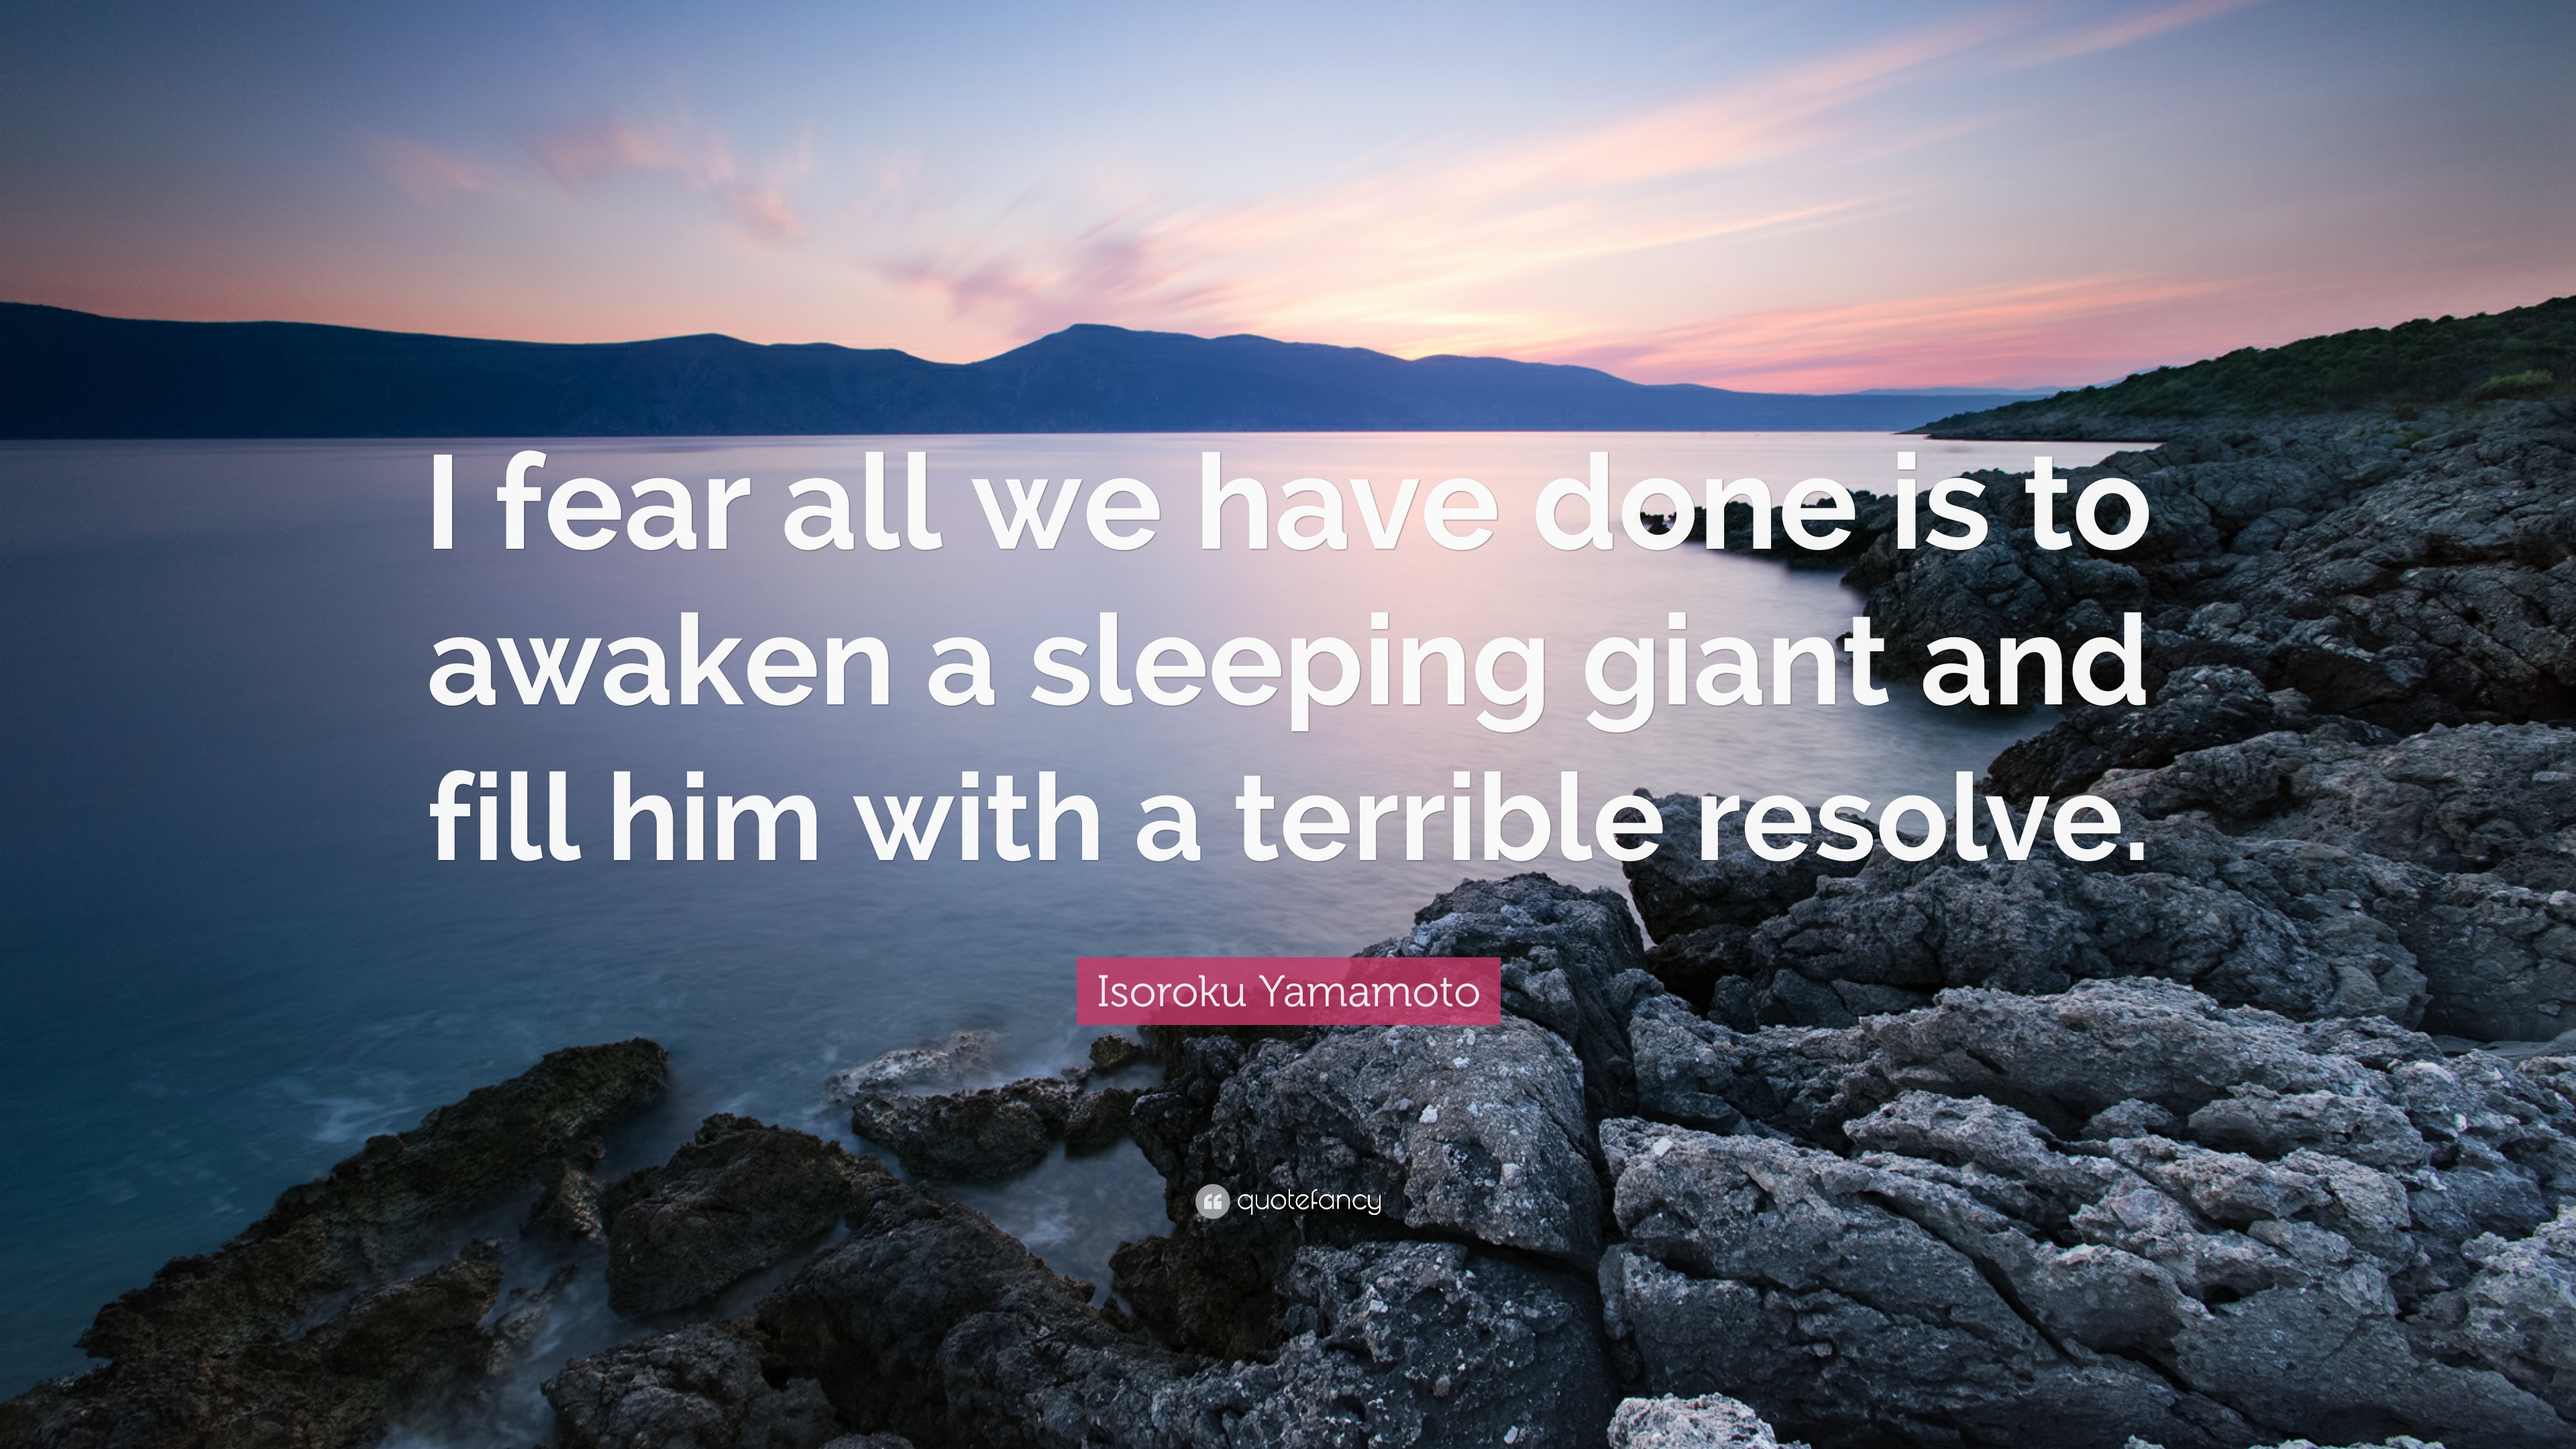 Isoroku Yamamoto Quote: “I fear all we have done is to awaken a sleeping  giant and